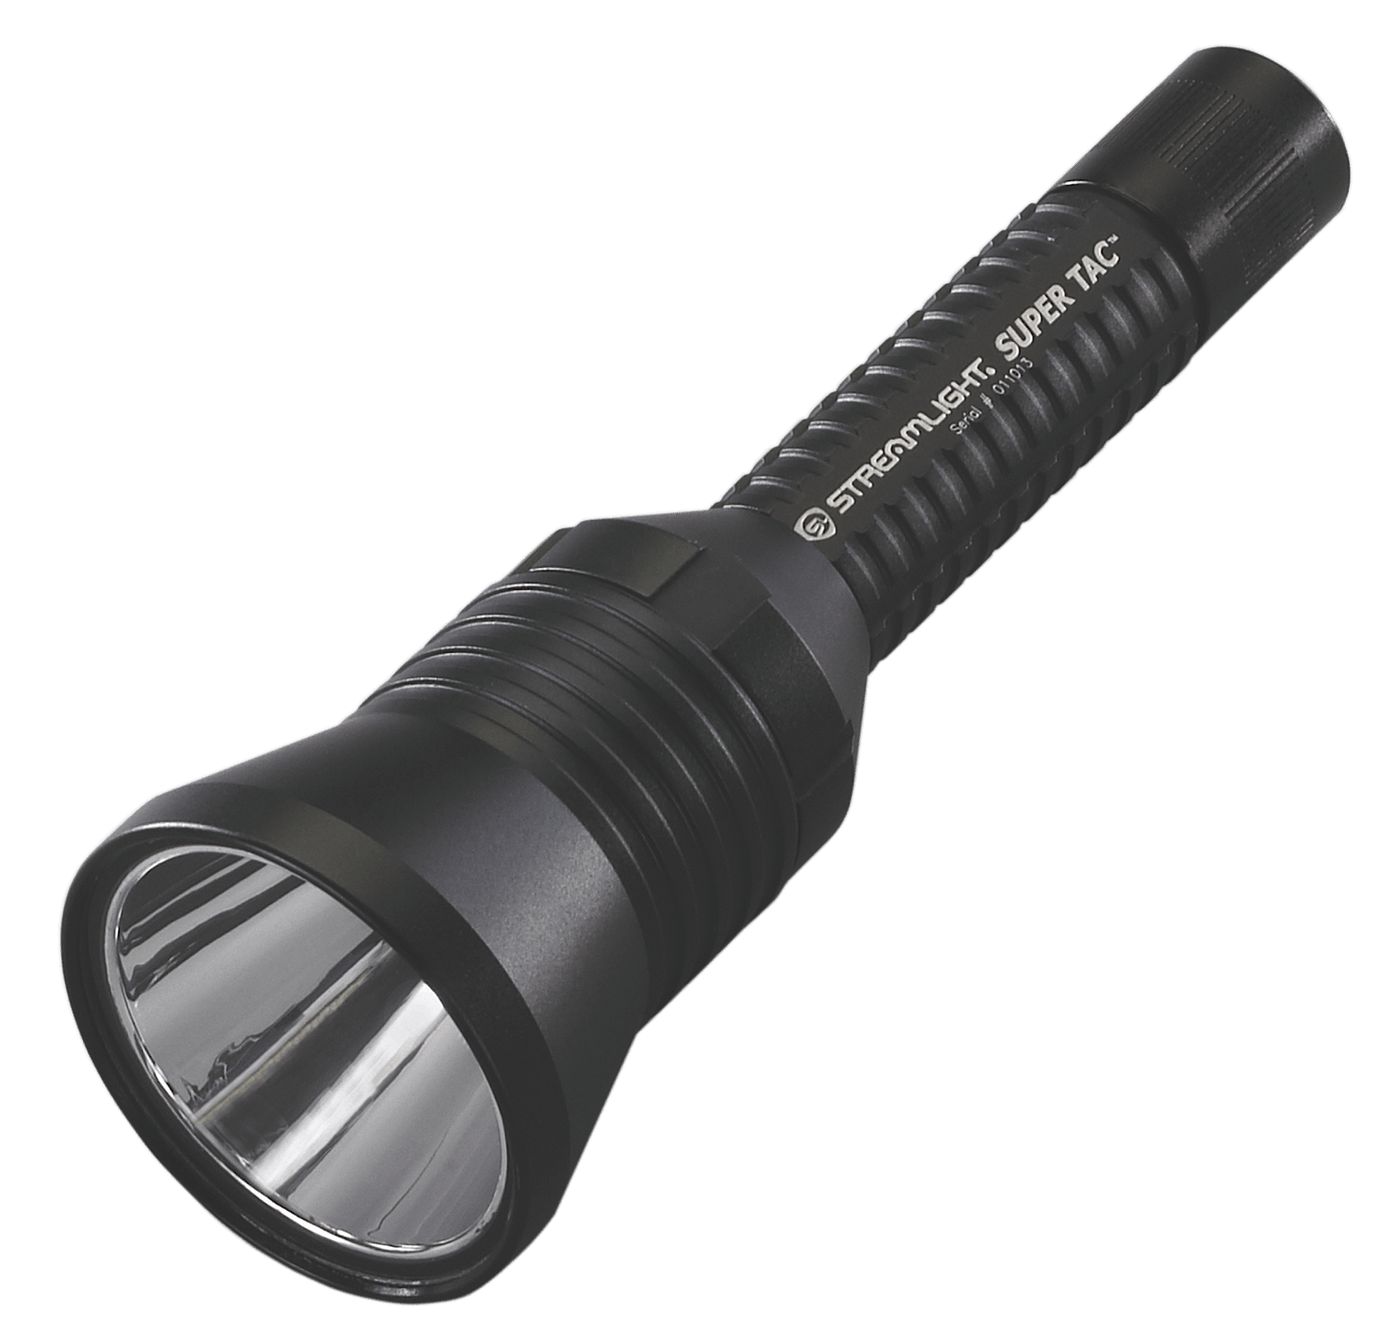 Streamlight Streamlight Super Tac C4 White - Led 30000cp Black Finish<< Lights And Accessories